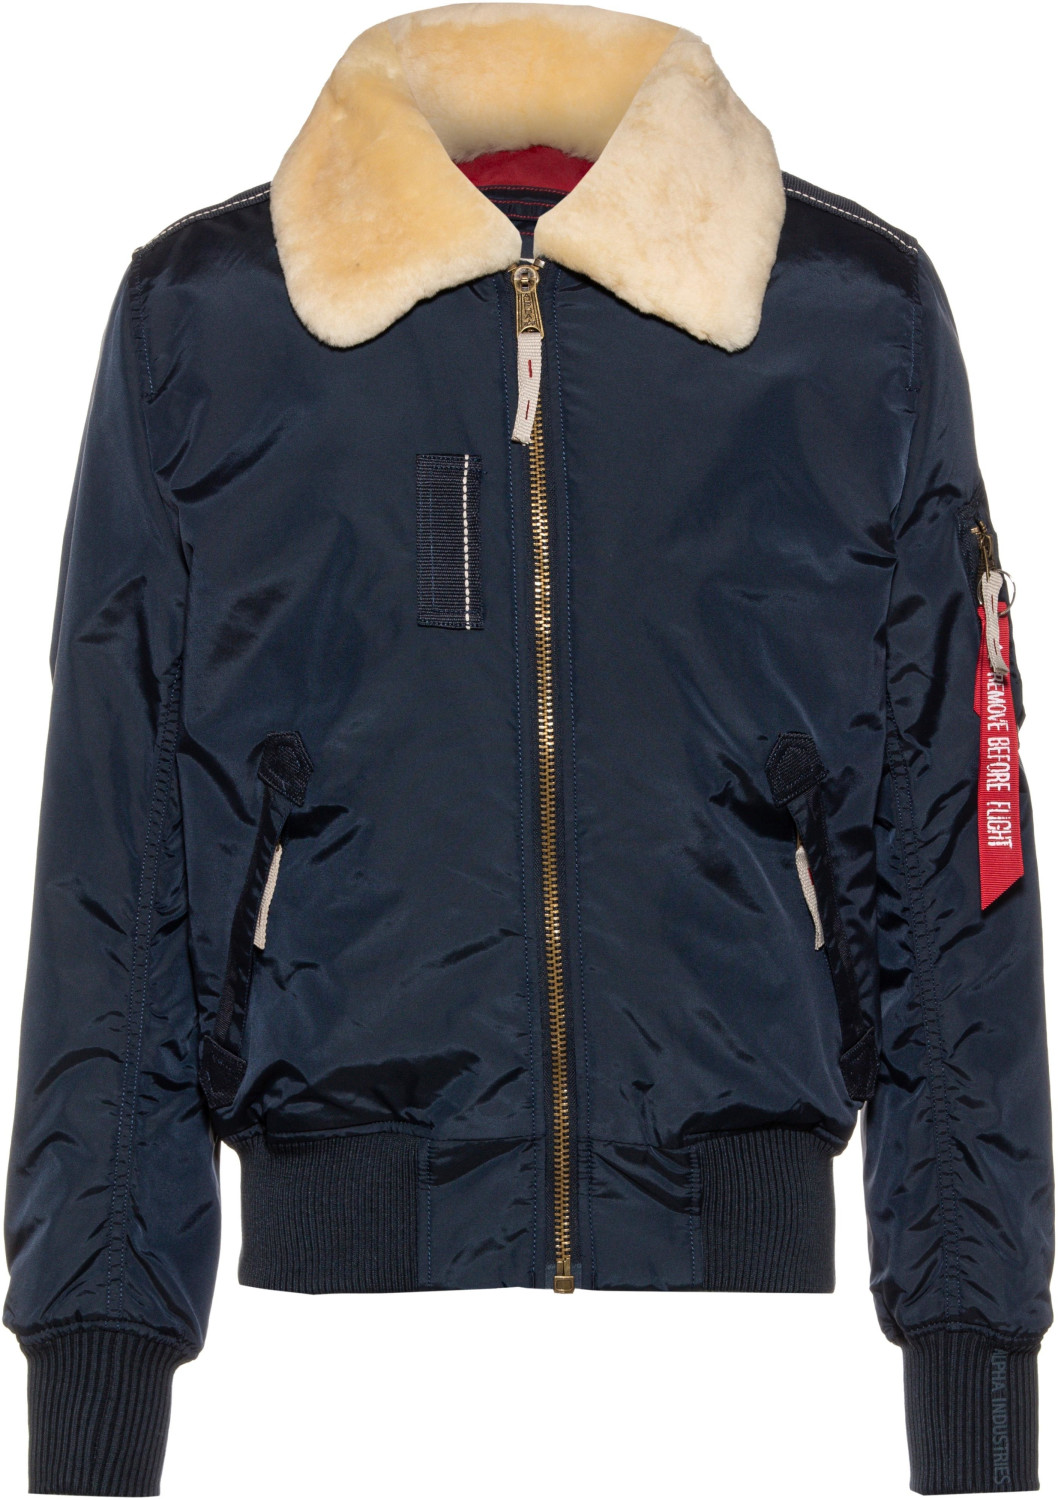 Buy Alpha Industries Injector III Man repl.blue from £136.48 (Today ...